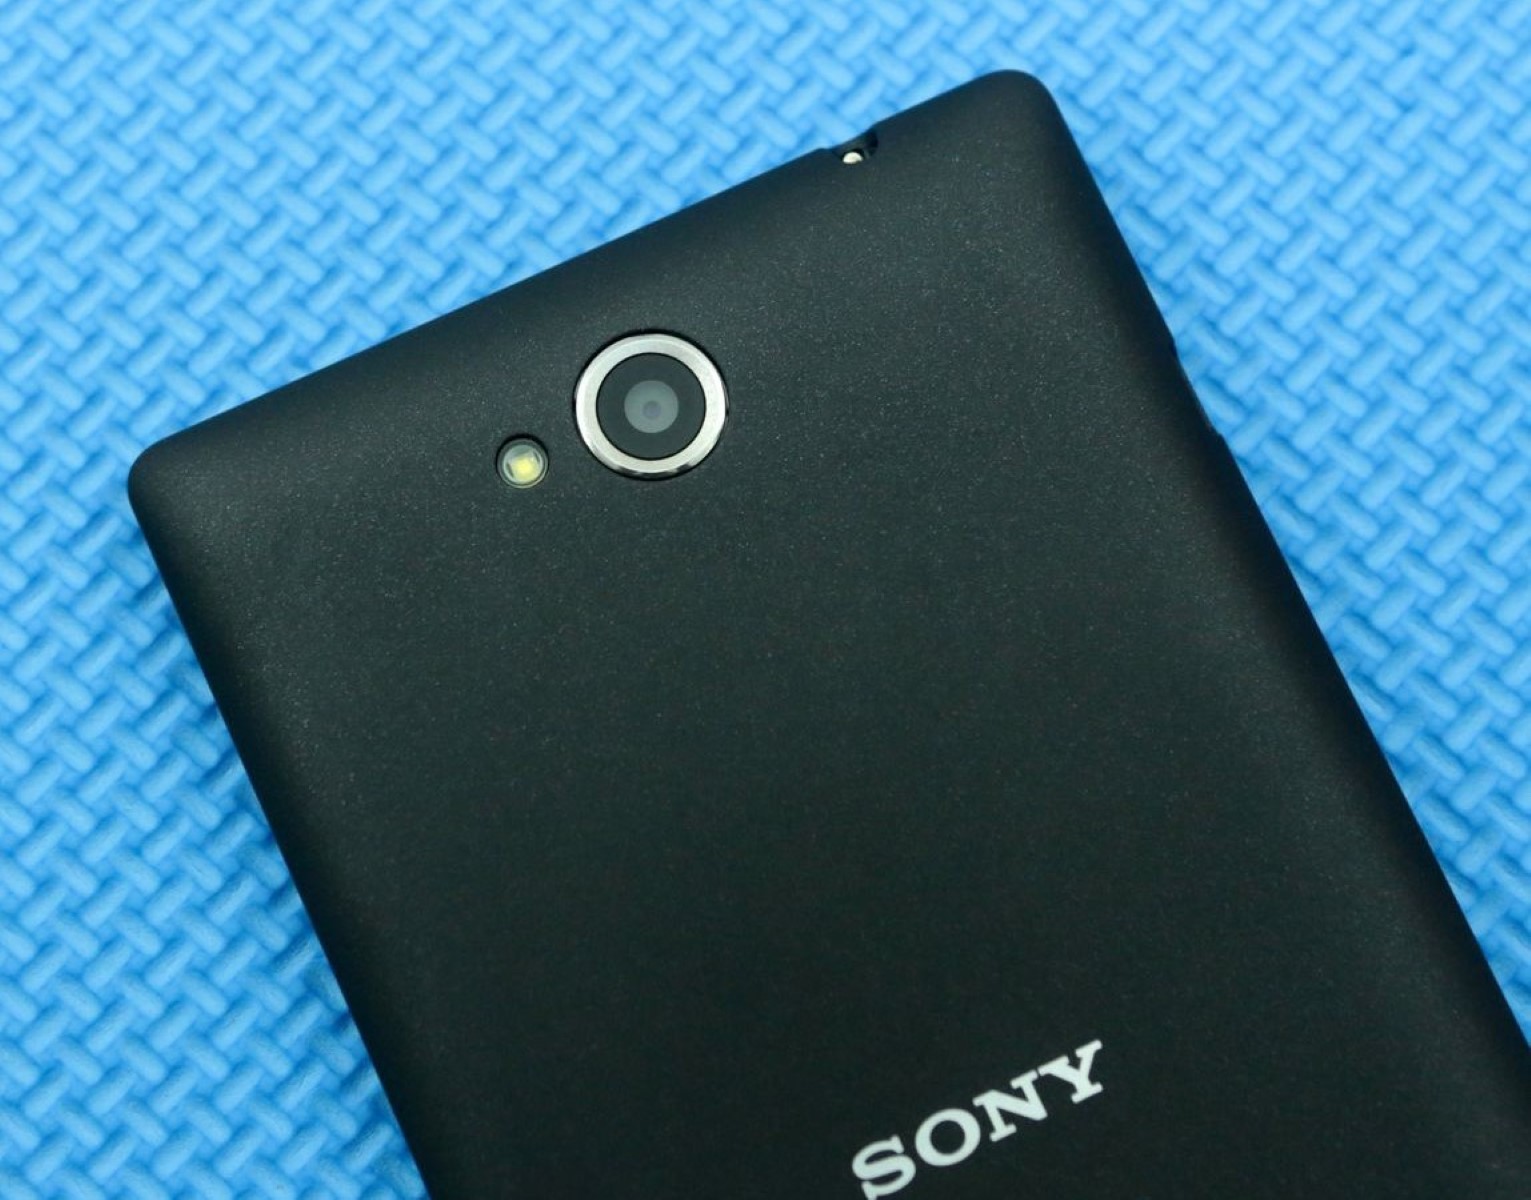 Sony Xperia P Rooting Tutorial: Unlocking Possibilities